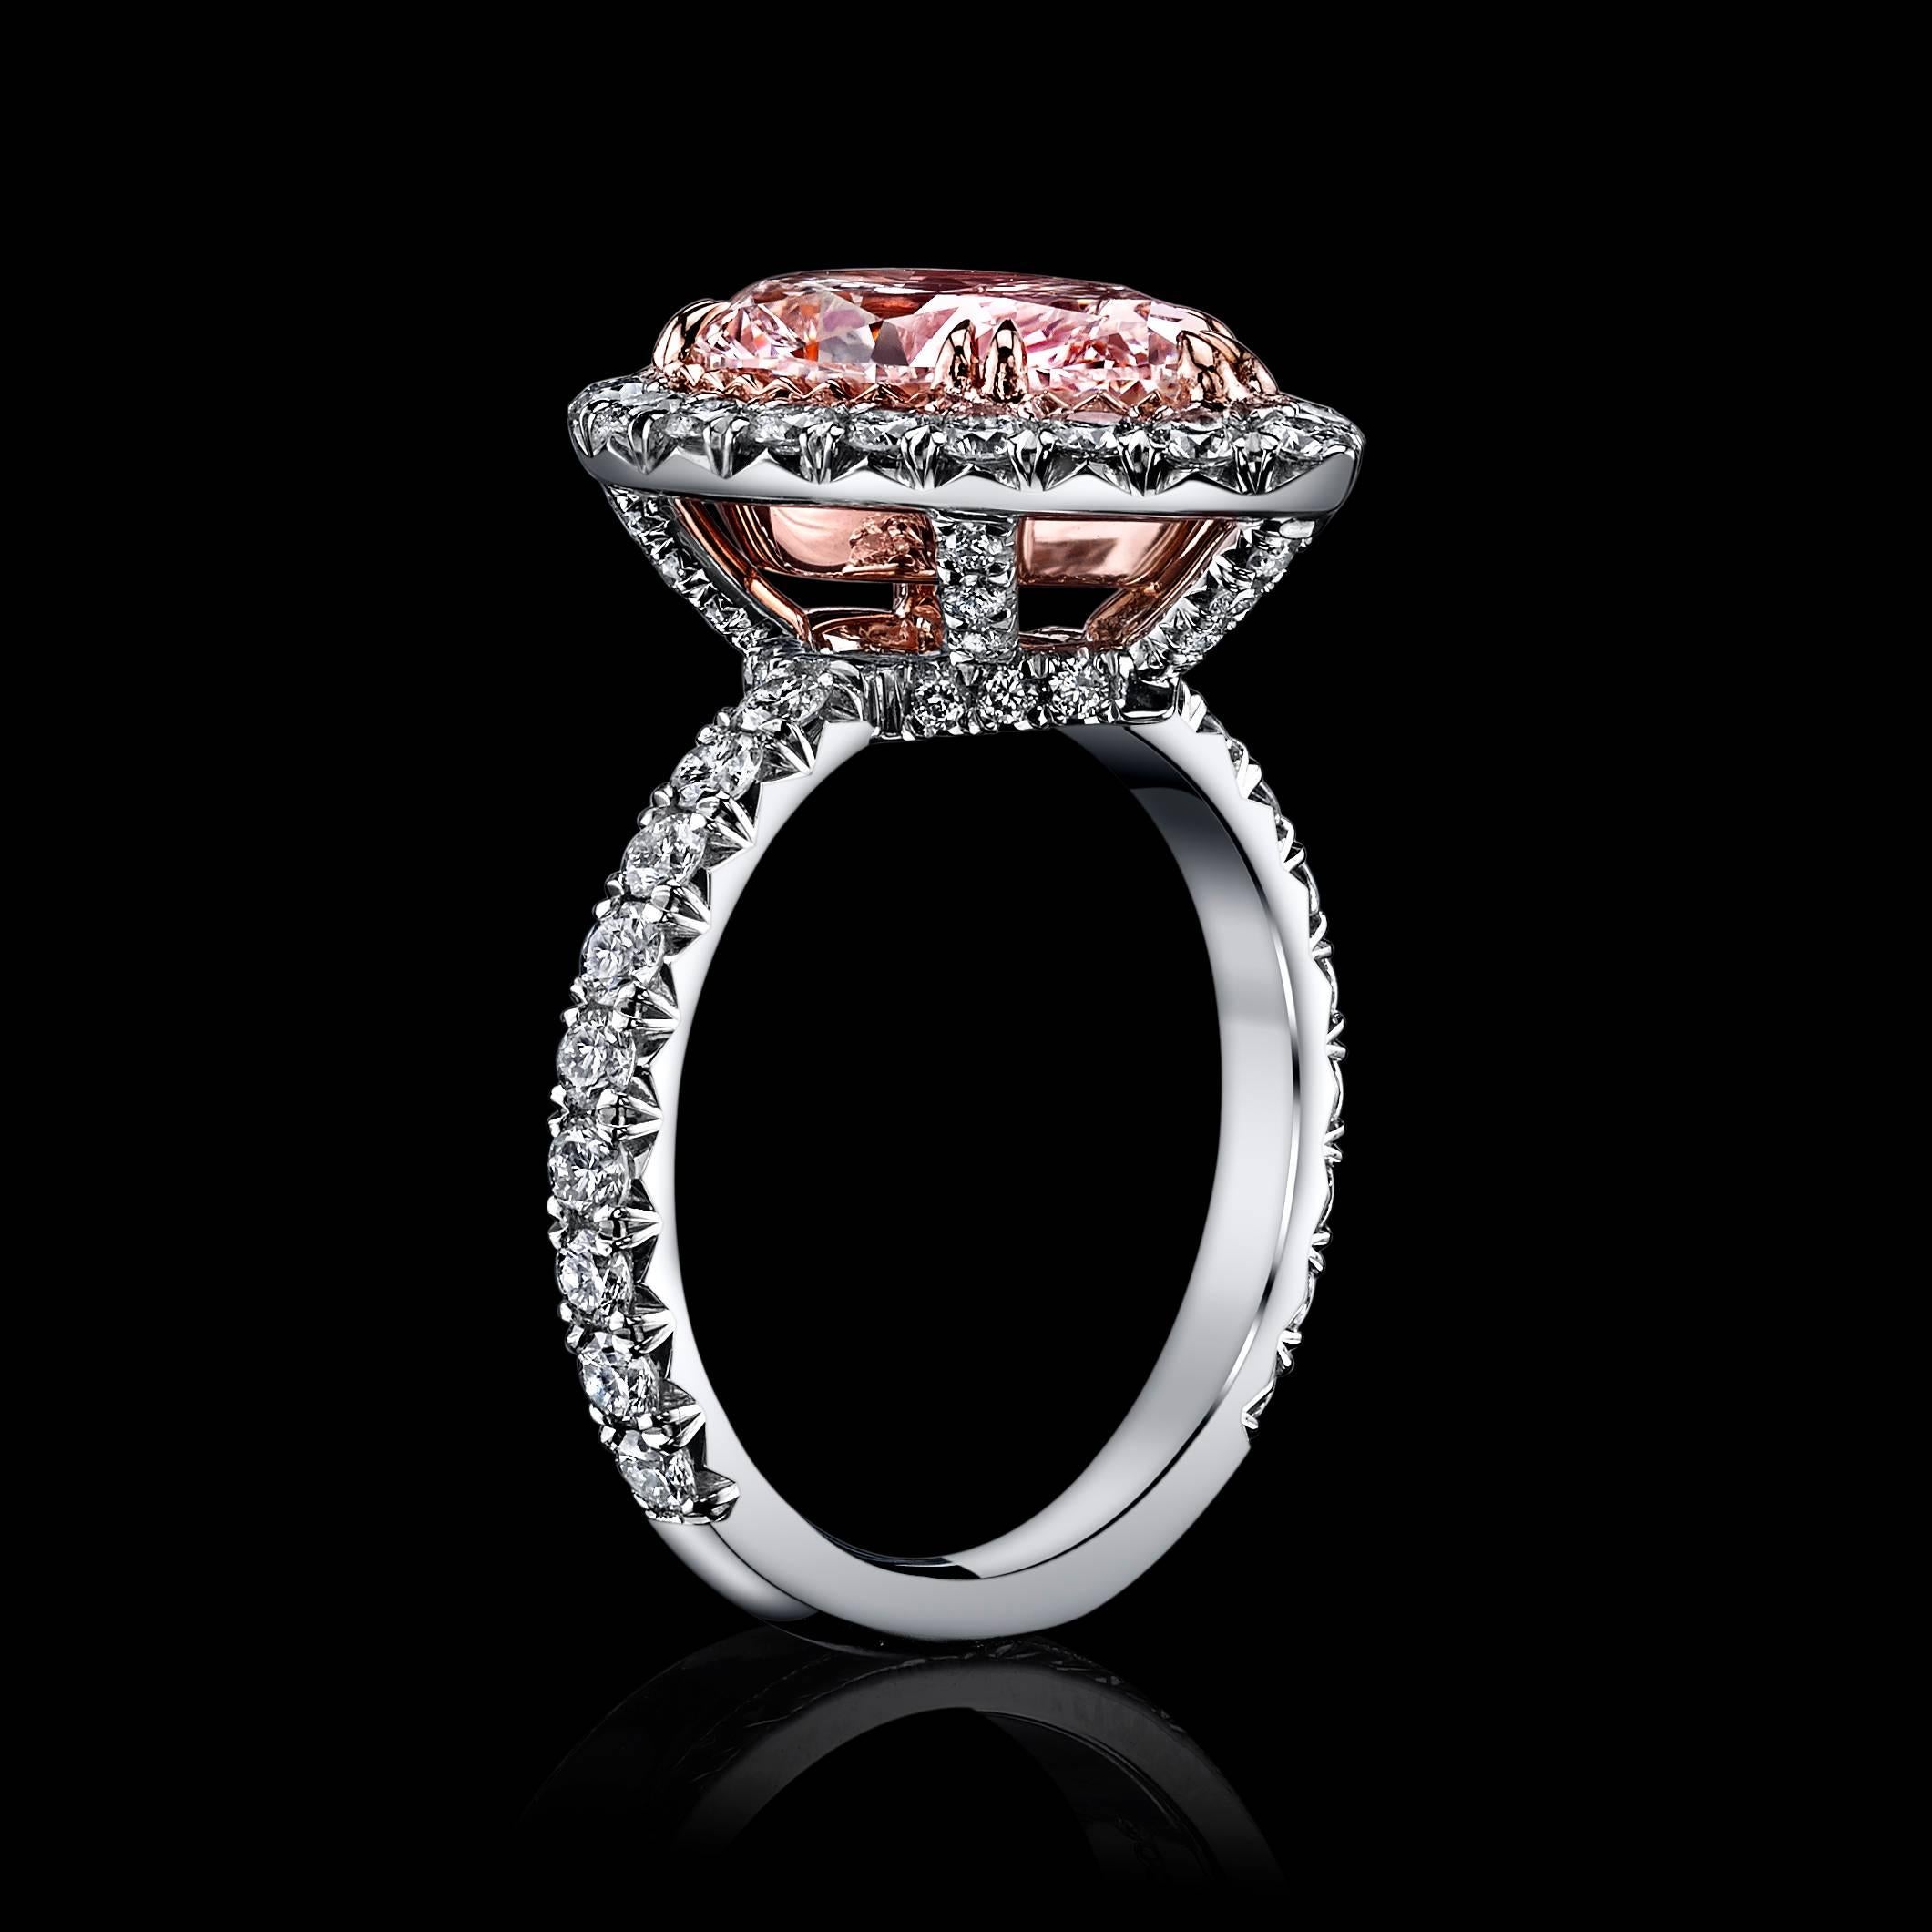 A stunning, 1.72ct GIA Certified Fancy Light Pink diamond, surrounded by a halo of round brilliant colorless diamonds, mounted in Platinum & 18K Rose Gold. An additional 57 round diamonds set into the halo and mounting, add a carat weight of 1.23 to